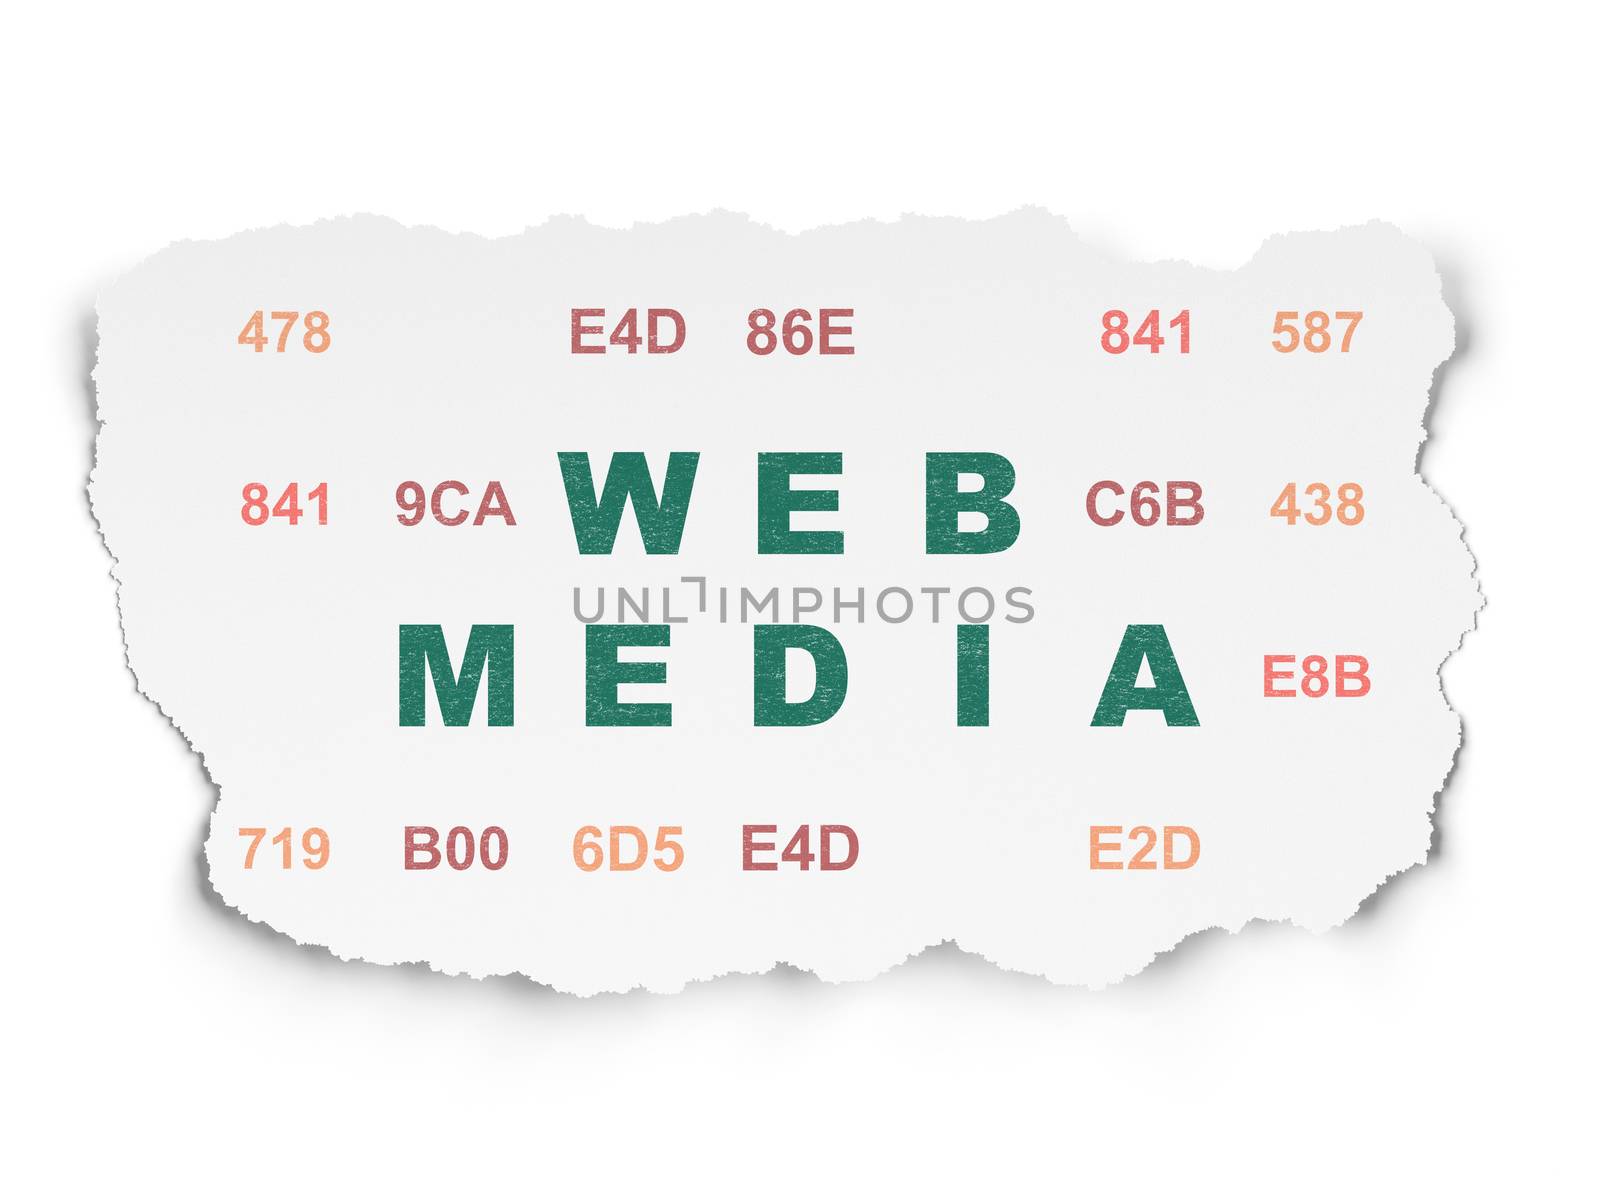 Web development concept: Painted green text Web Media on Torn Paper background with  Hexadecimal Code